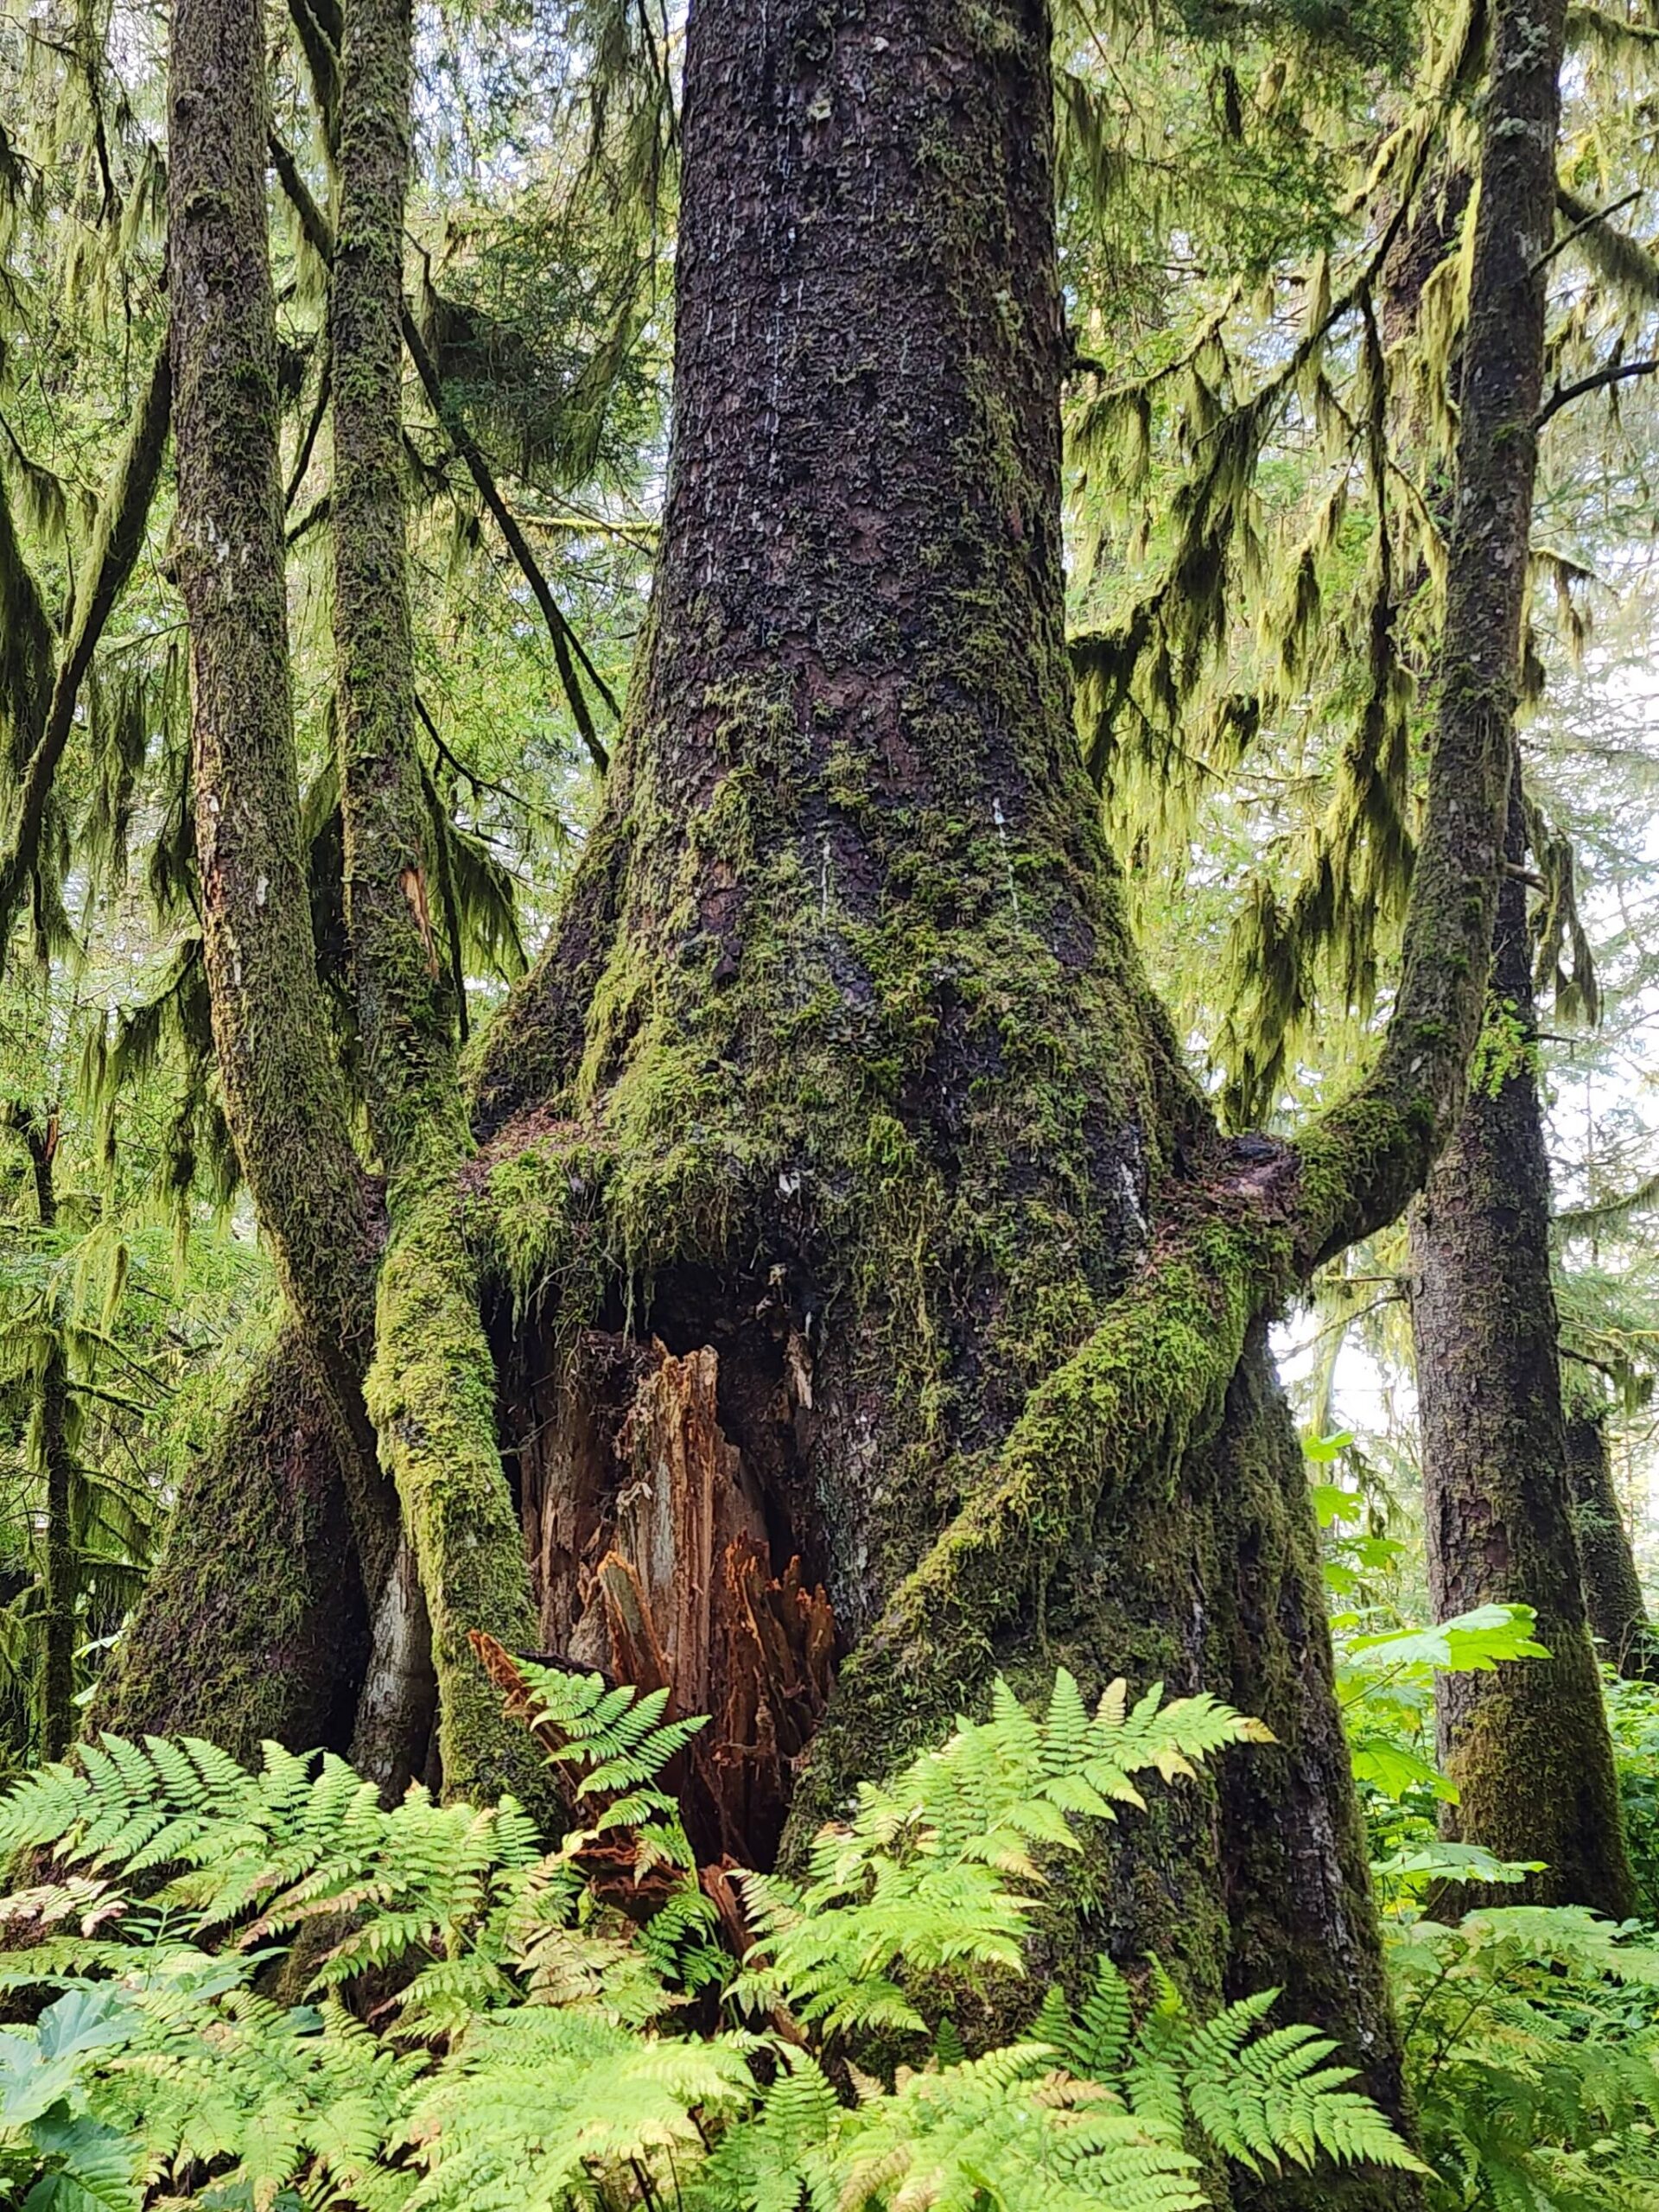 Three generations of tree colonization, starting with an old stump. (Photo by Pam Bergeson)